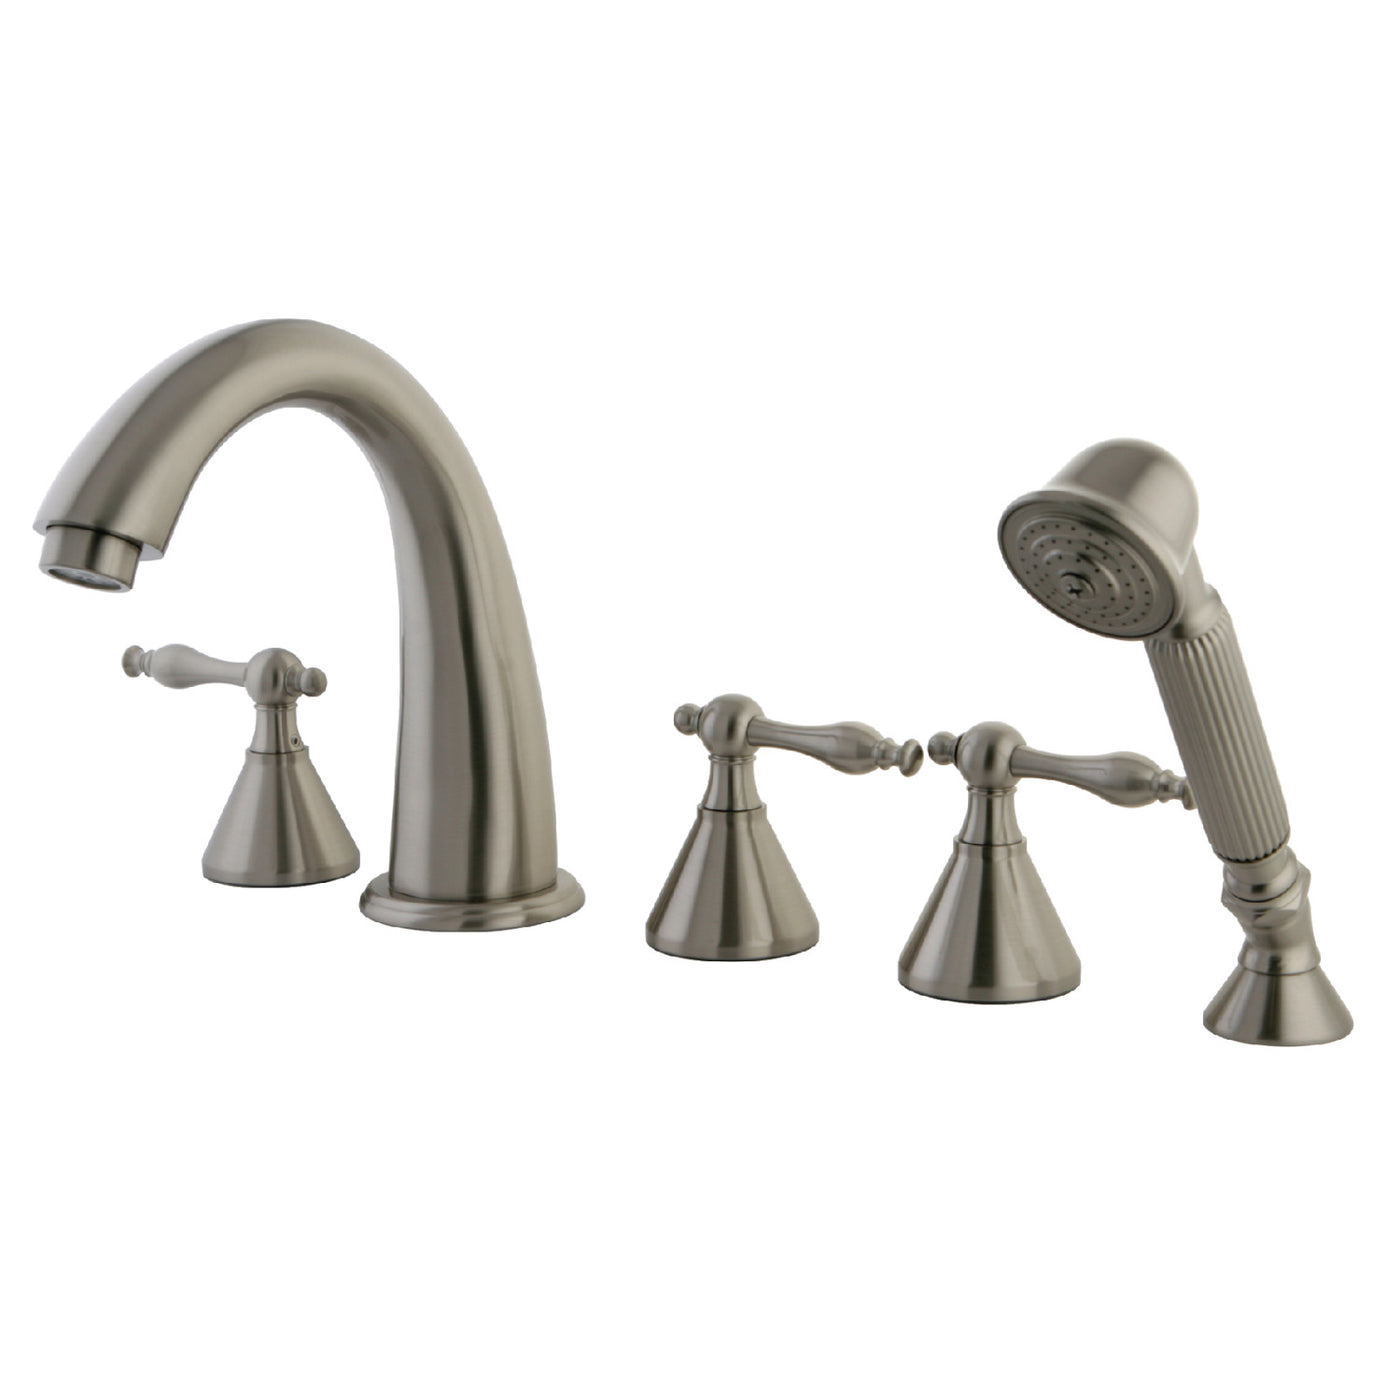 Elements of Design ES23685NL Roman Tub Faucet with Hand Shower, Brushed Nickel